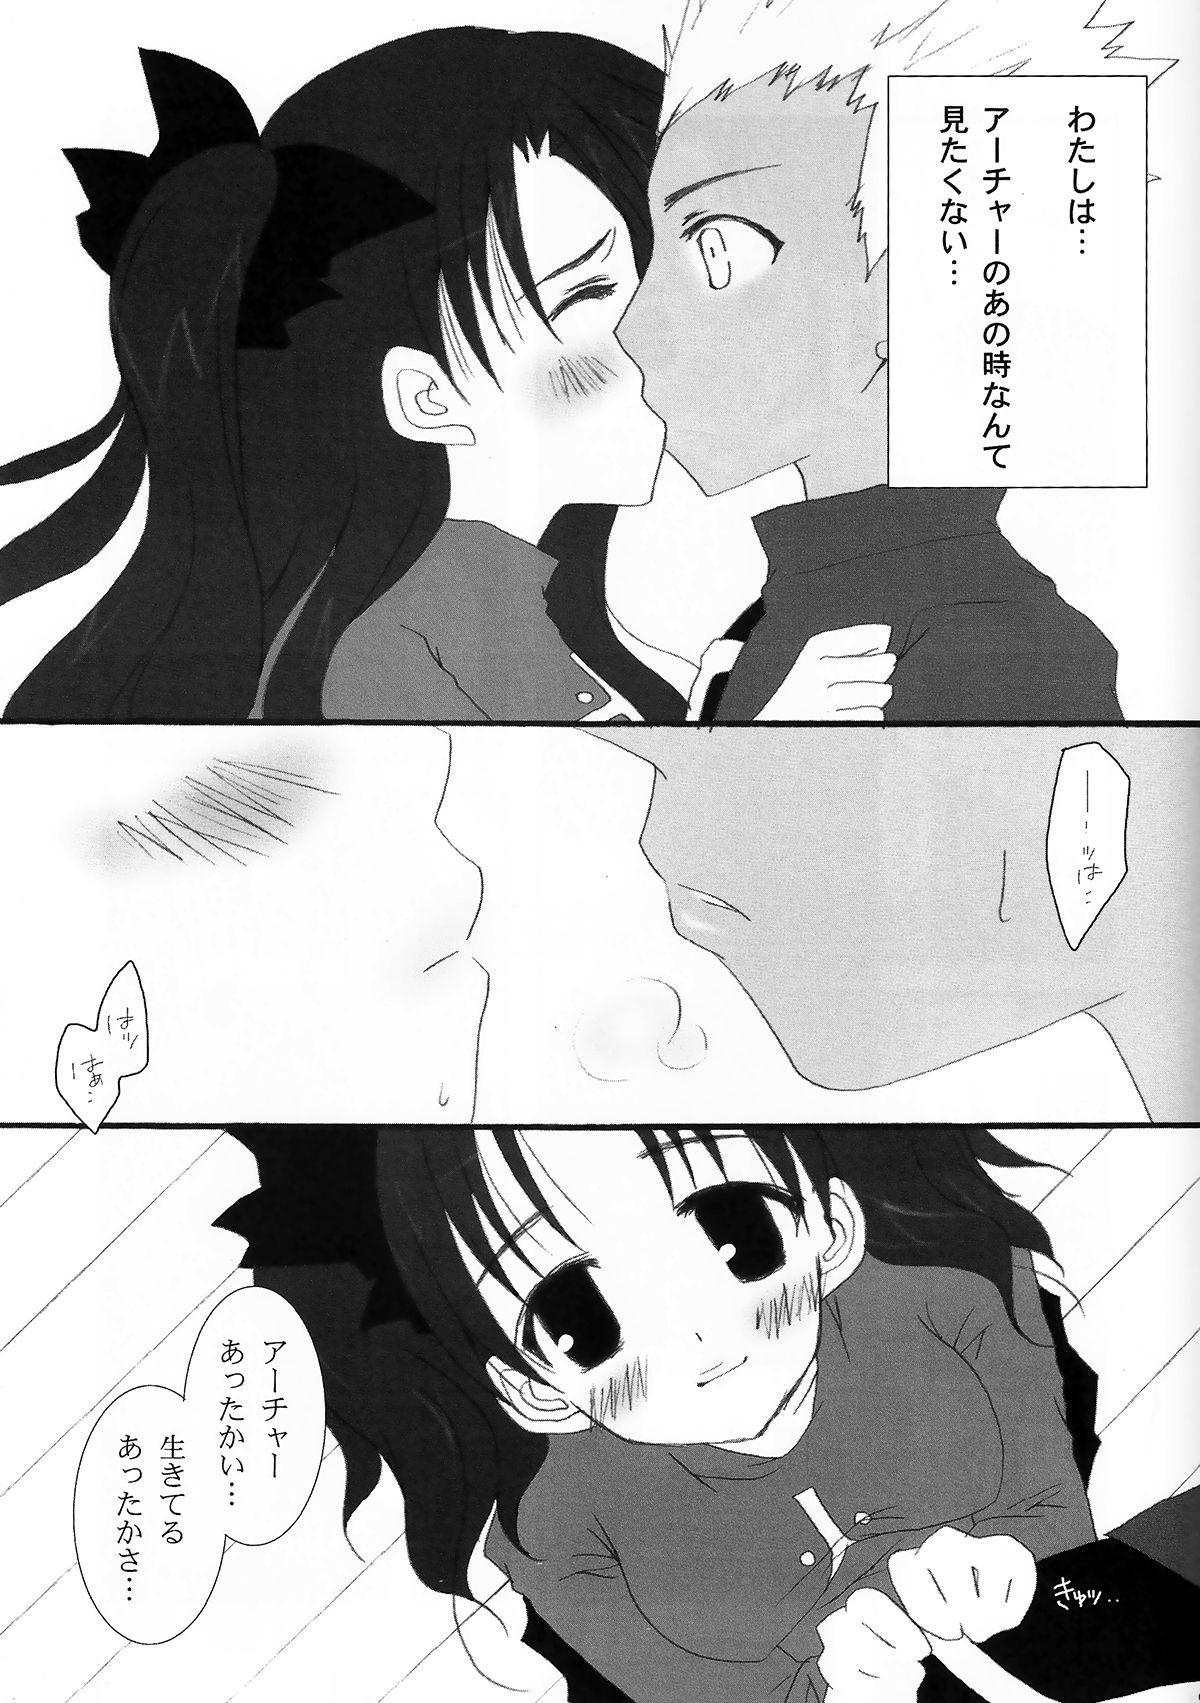 Pareja RELATION - Fate stay night Interracial Hardcore - Page 7